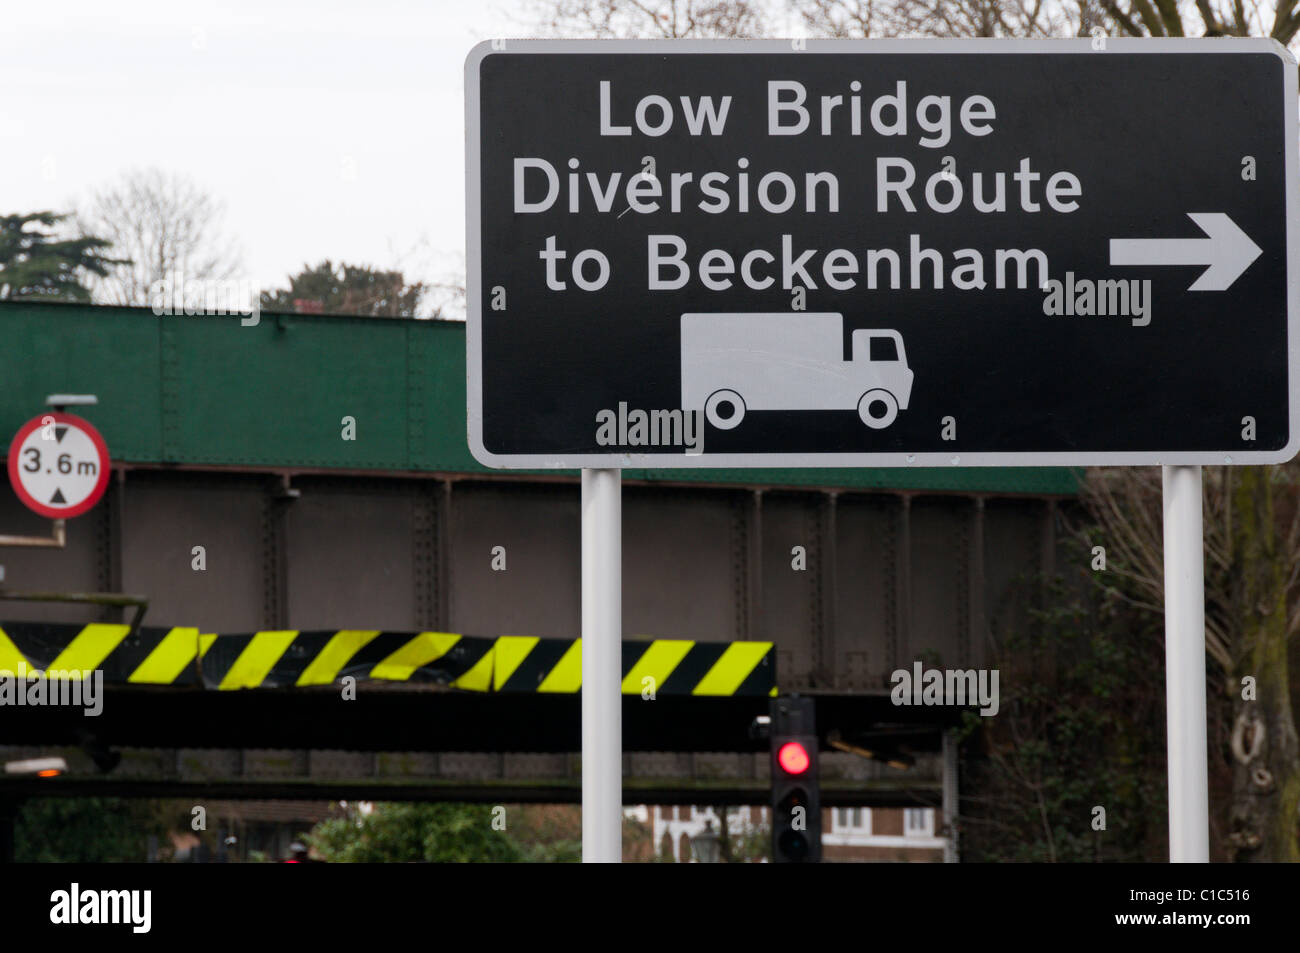 A road sign for a diversion route to Beckenham avoiding the low bridge outside Shortlands railway station (in background). Stock Photo